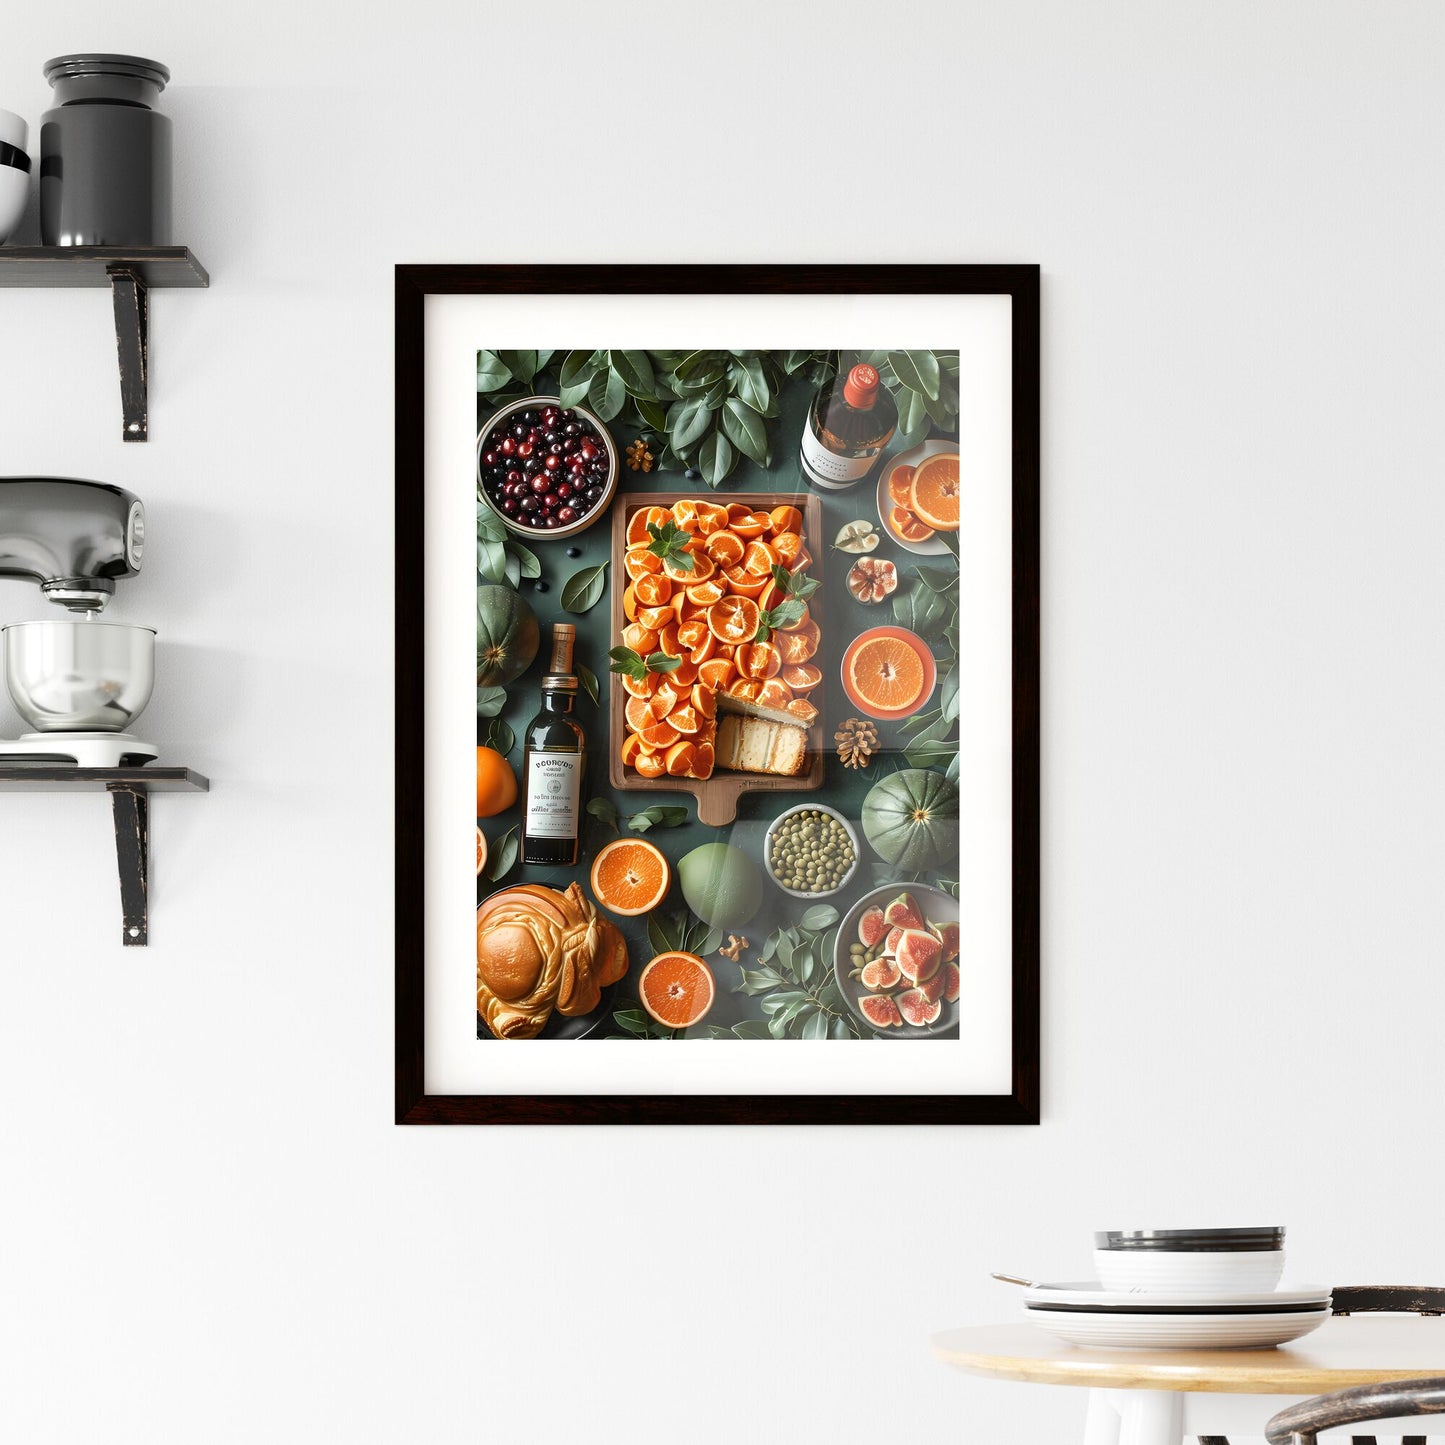 View from above on a laid table, birthday, cake, plates, presents - Art print of a table full of fruit and a bottle of wine Default Title